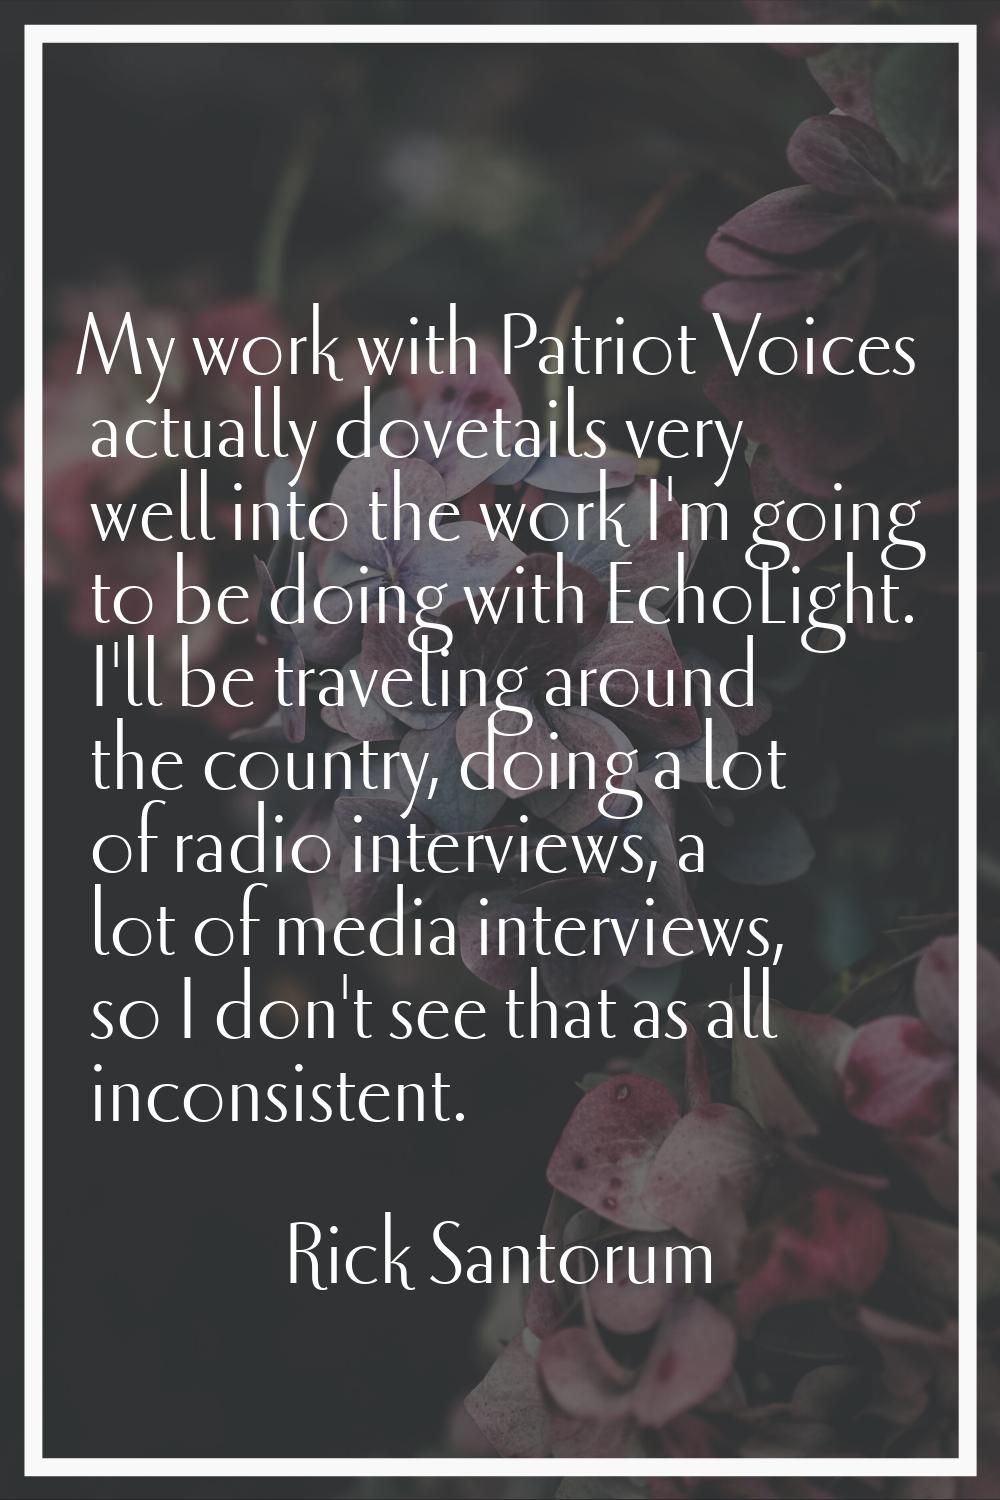 My work with Patriot Voices actually dovetails very well into the work I'm going to be doing with E